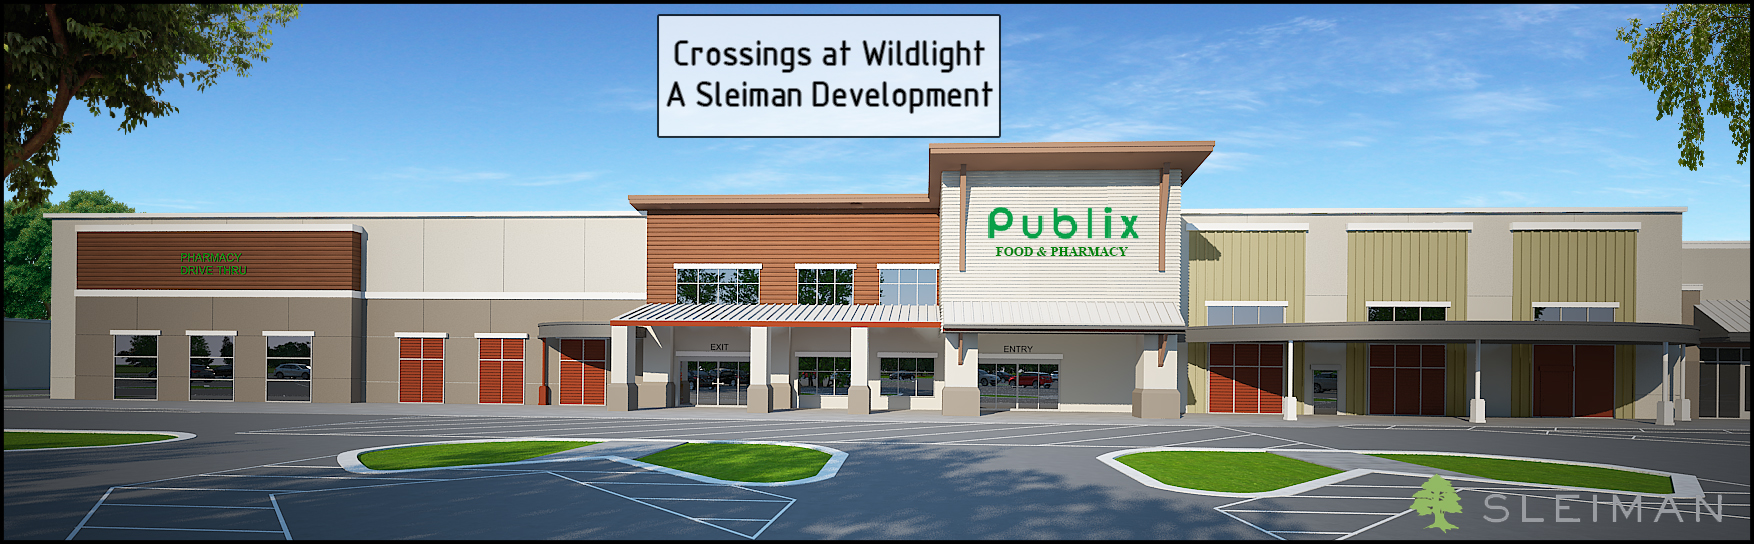 Exterior rendering of the new Publix Food & Pharmacy at Wildlight - a Sleiman development.